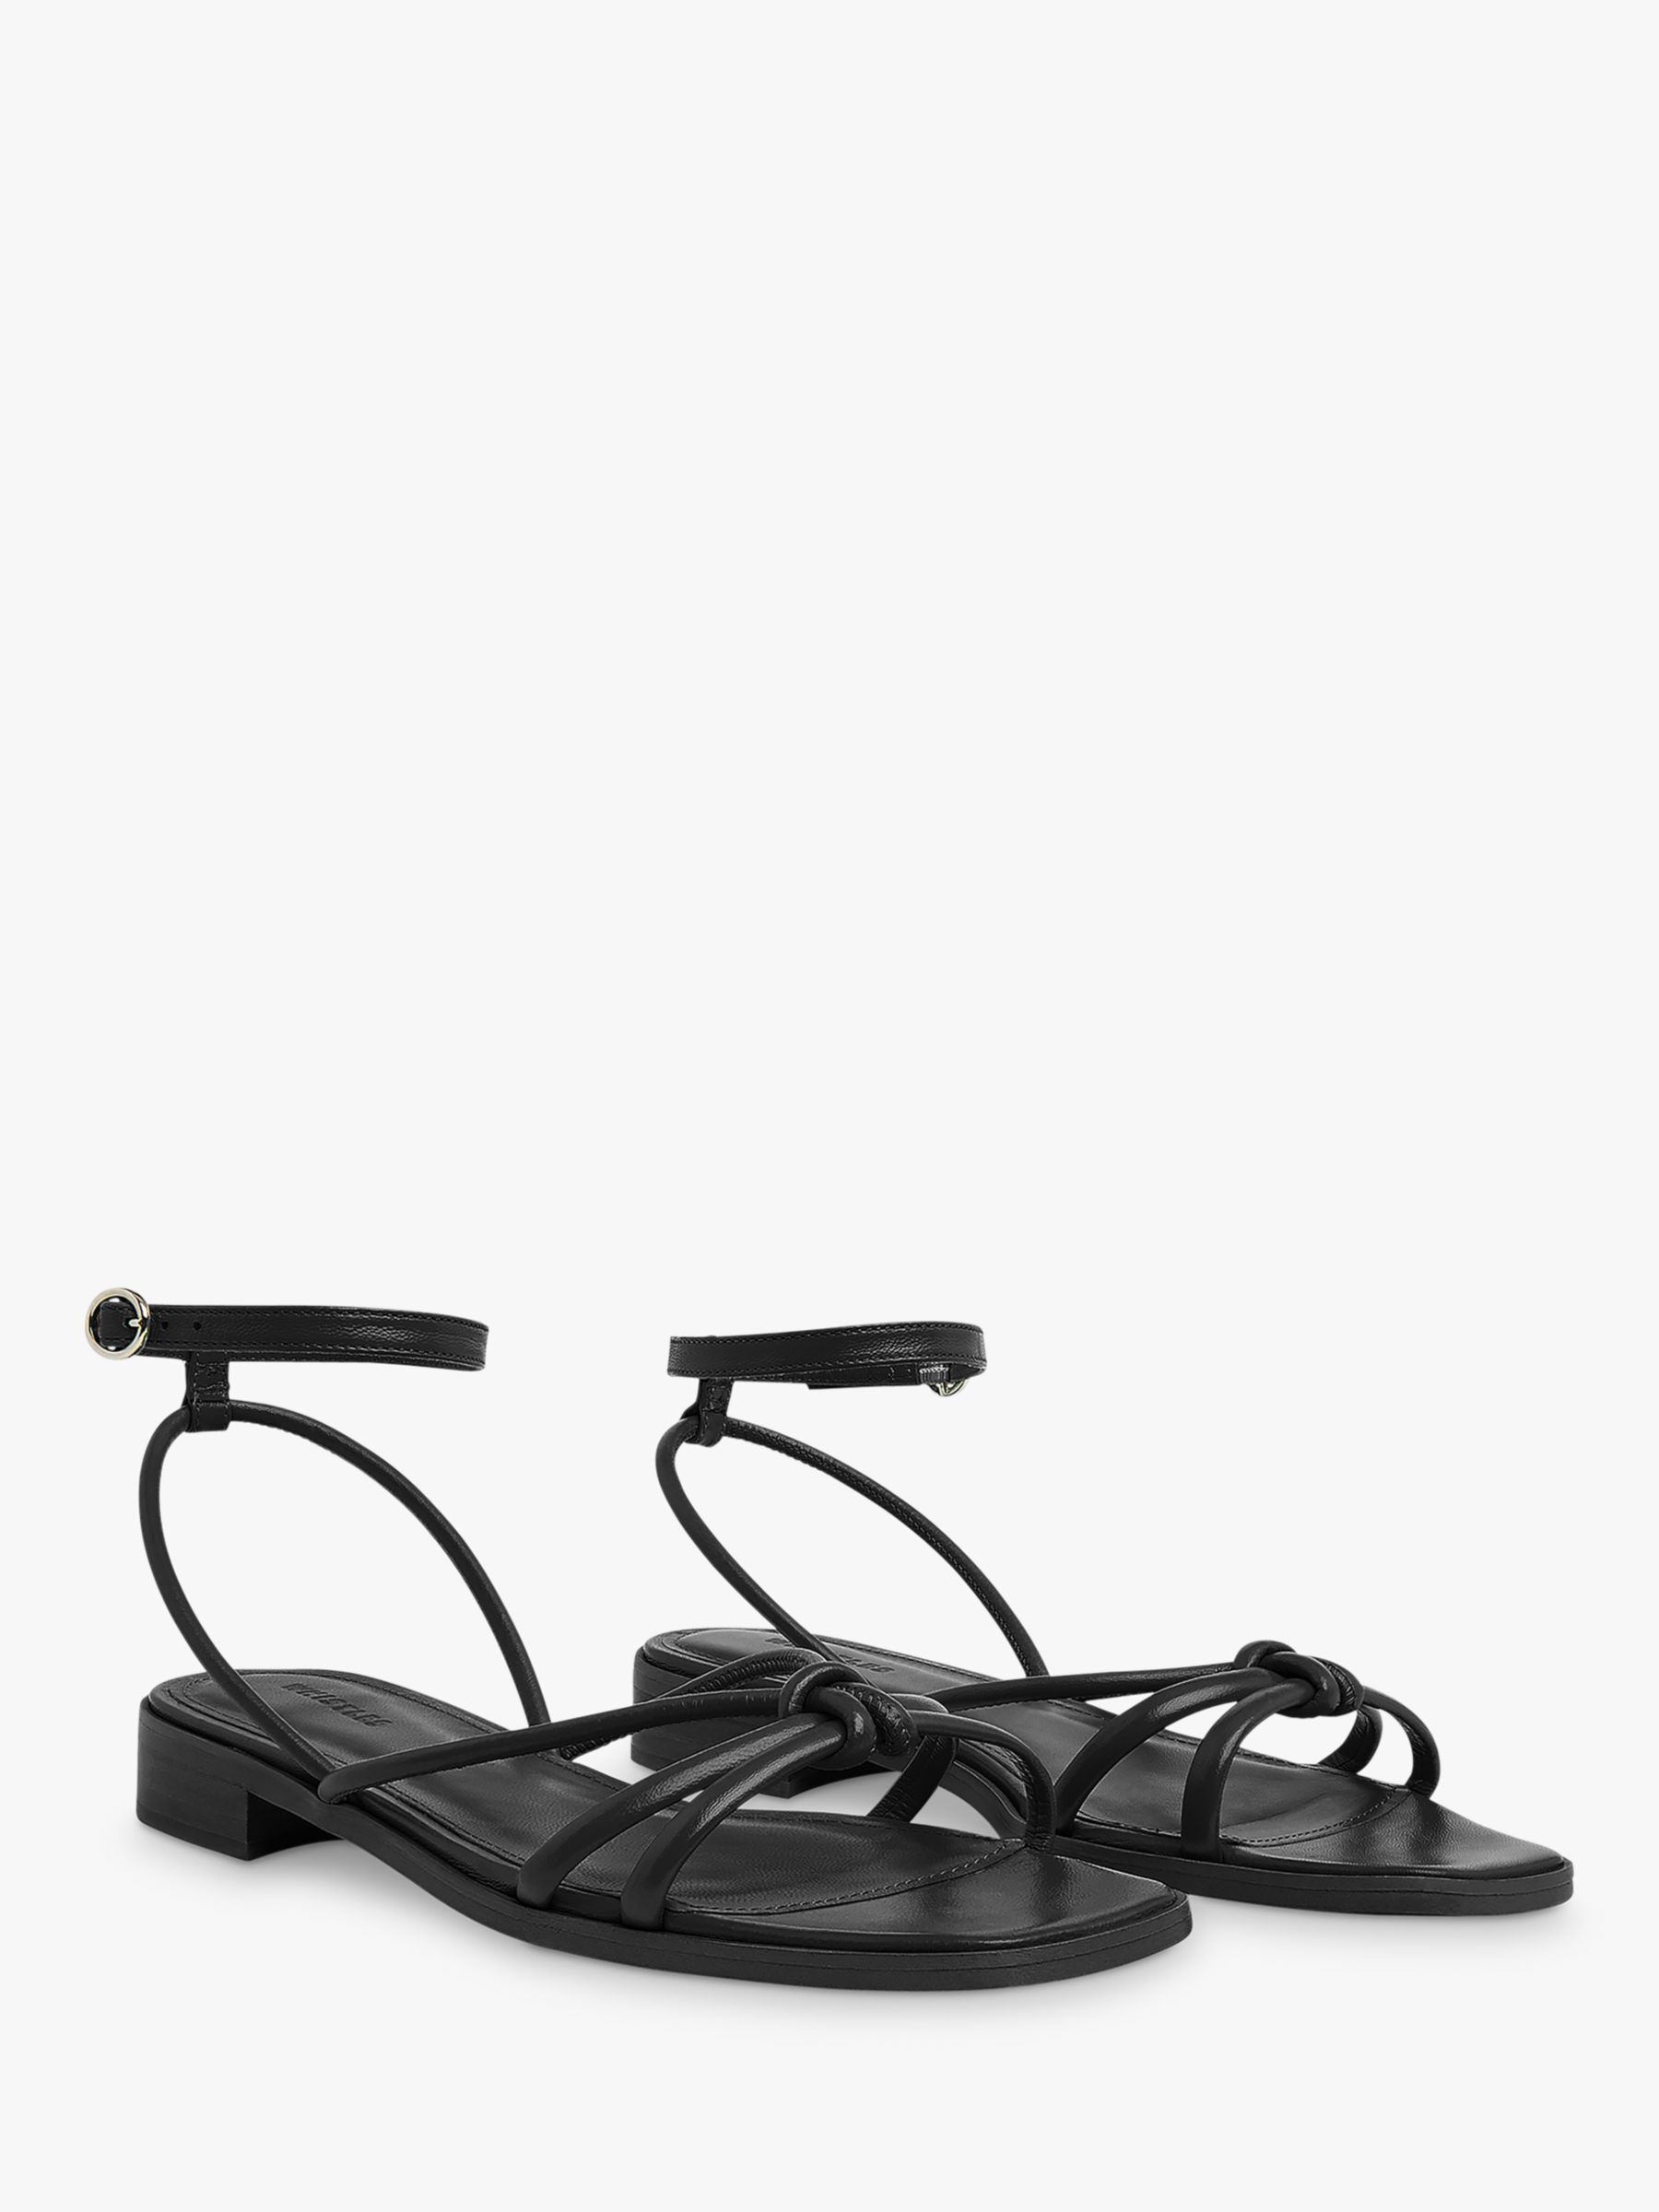 Whistles Roya Leather Flat Strappy Sandals, Black